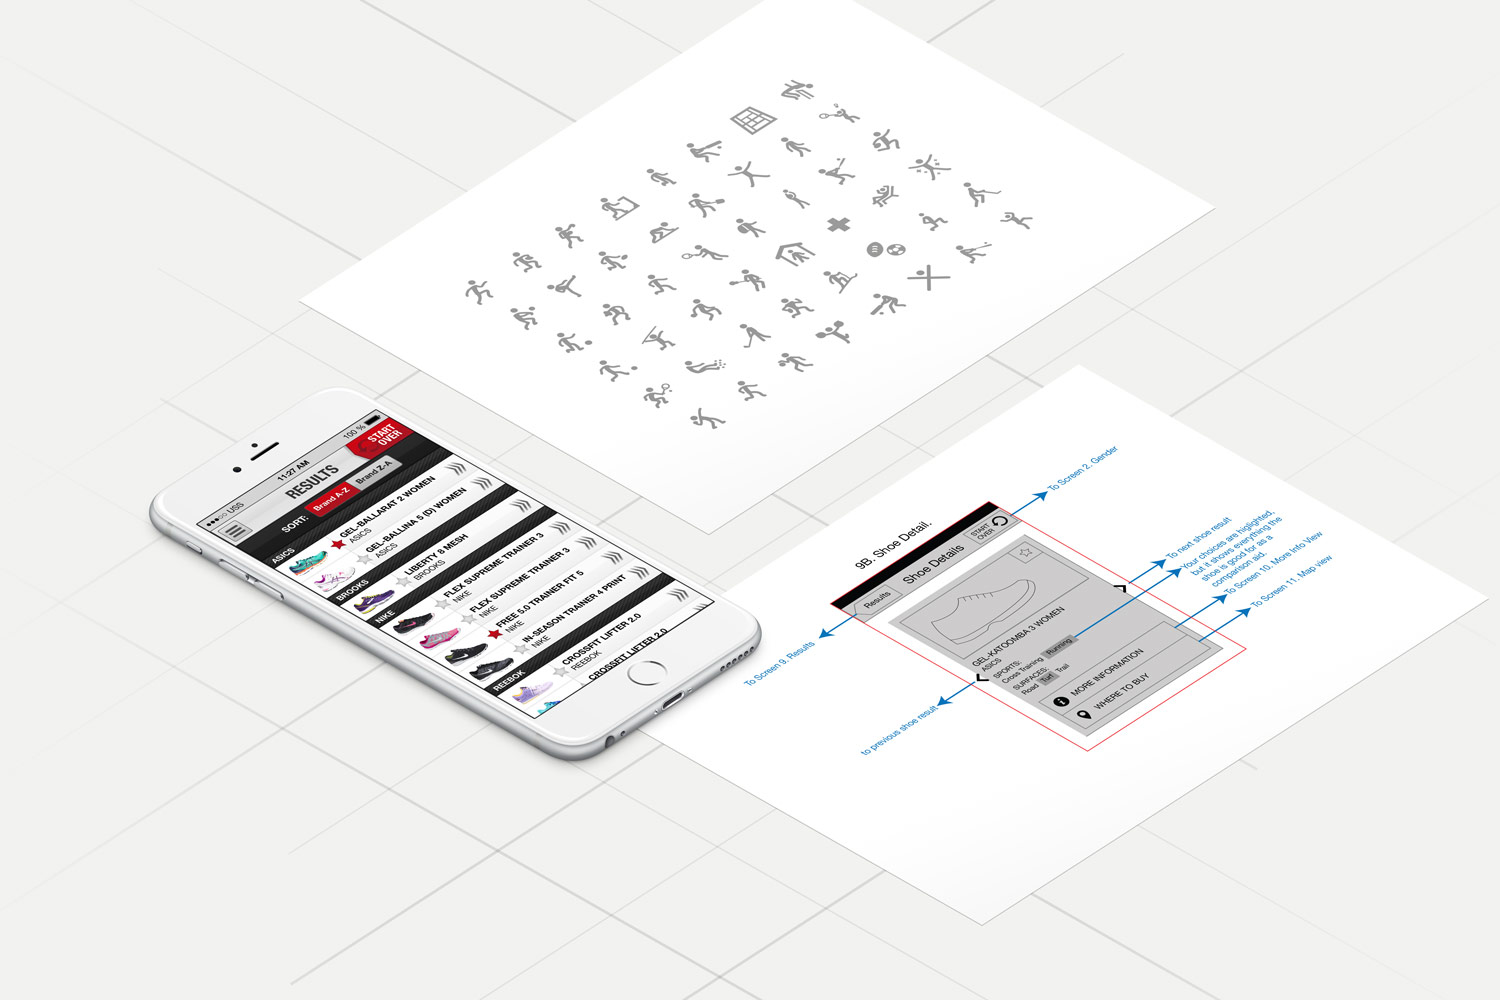 Ultimate Shoe Selector - Digital Product Design by Theysaurus